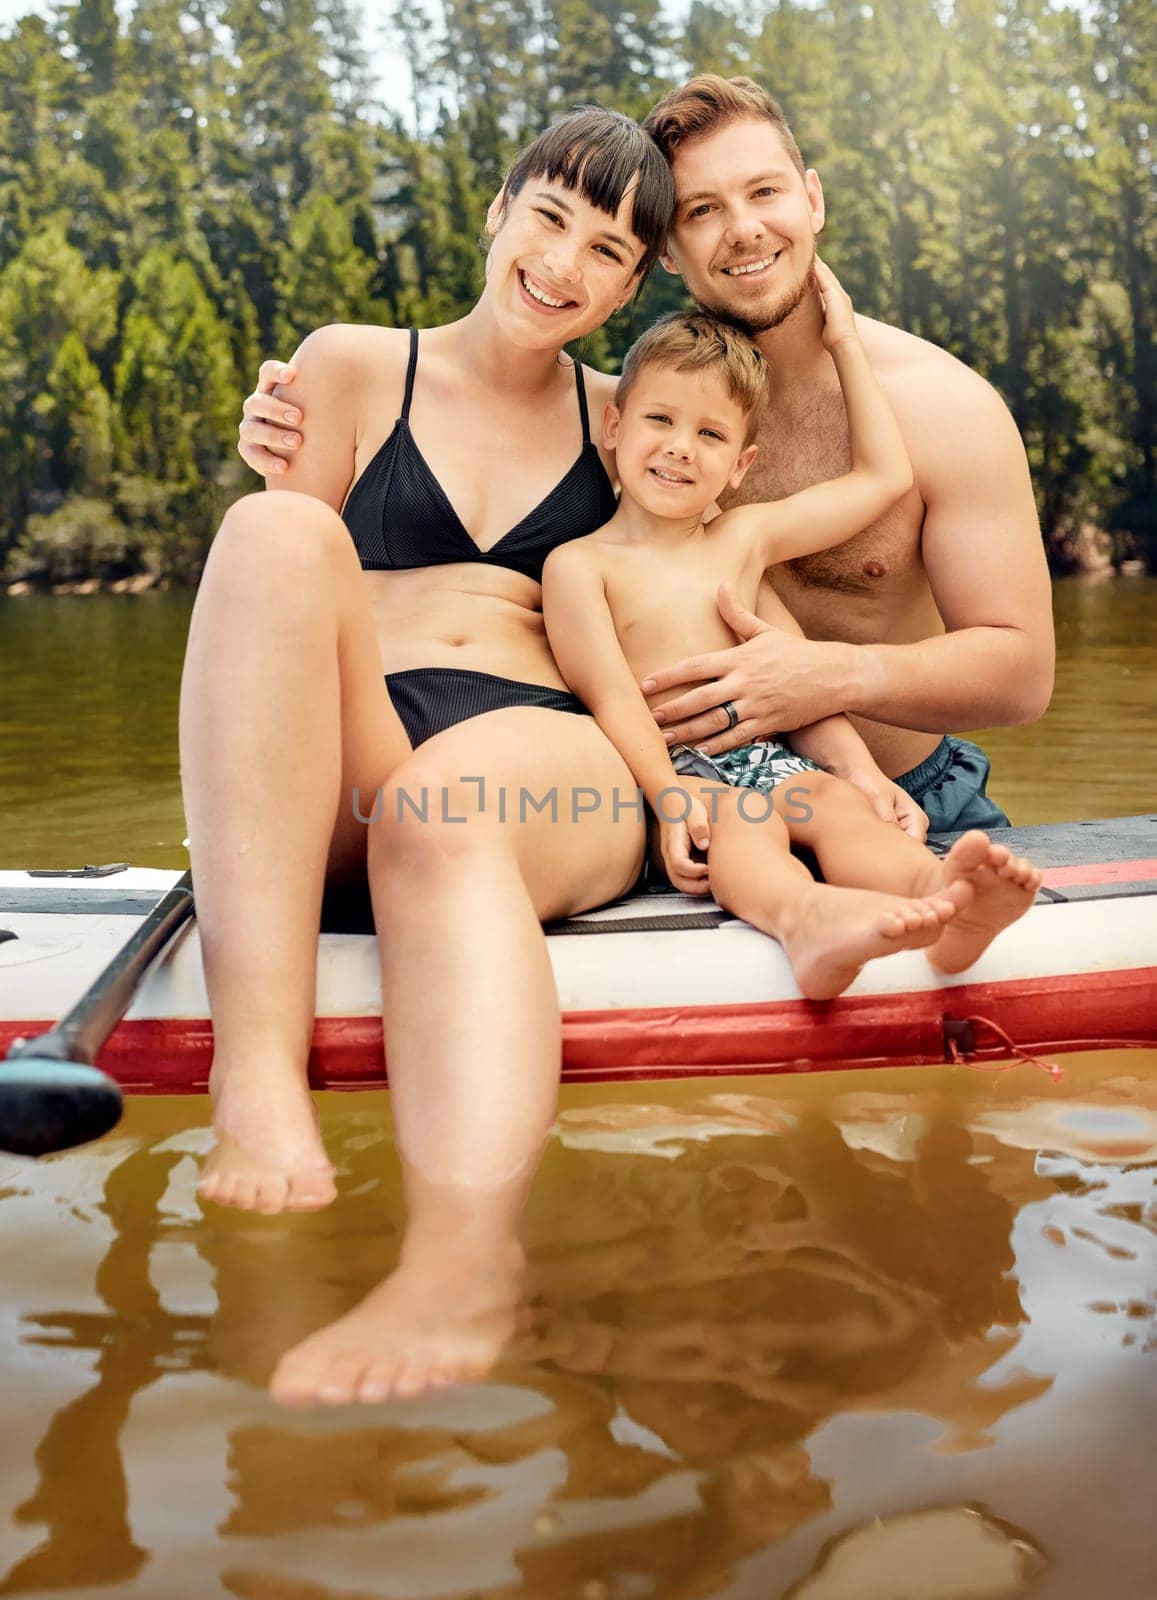 Lake, family on paddle board and relax outdoor, summer holiday and travel in portrait. Adventure, freedom and fun, man and woman with boy child in swimsuit, vacation and bonding together in nature.